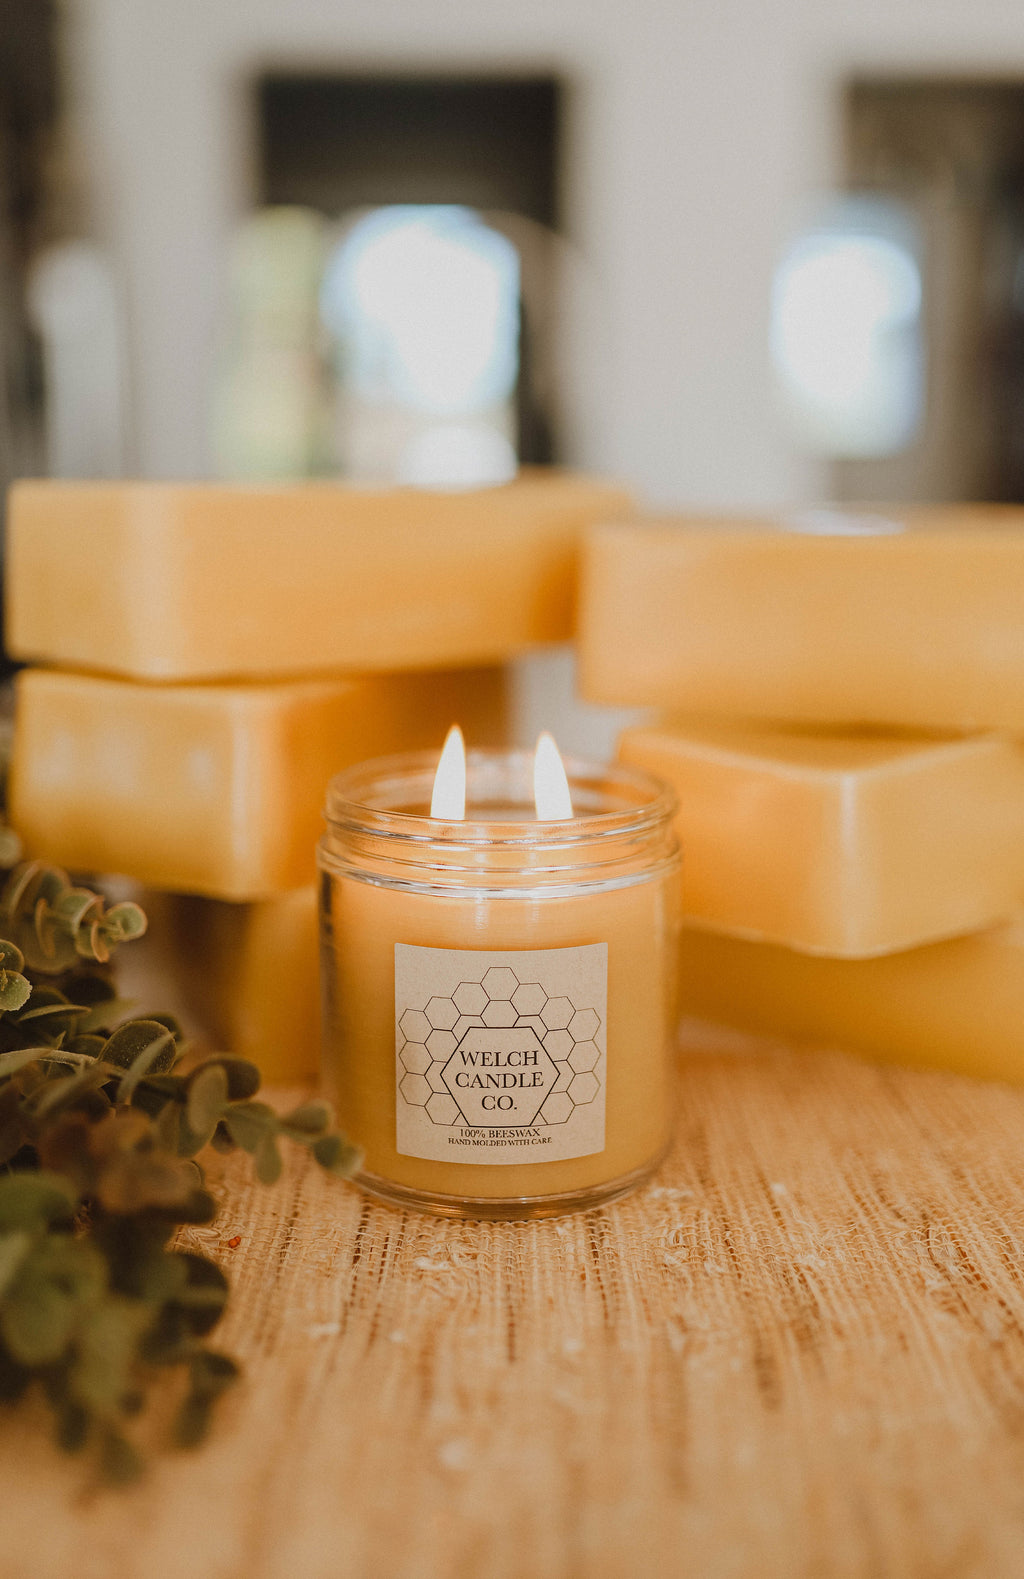 BEESWAX CANDLE — Ace General Store